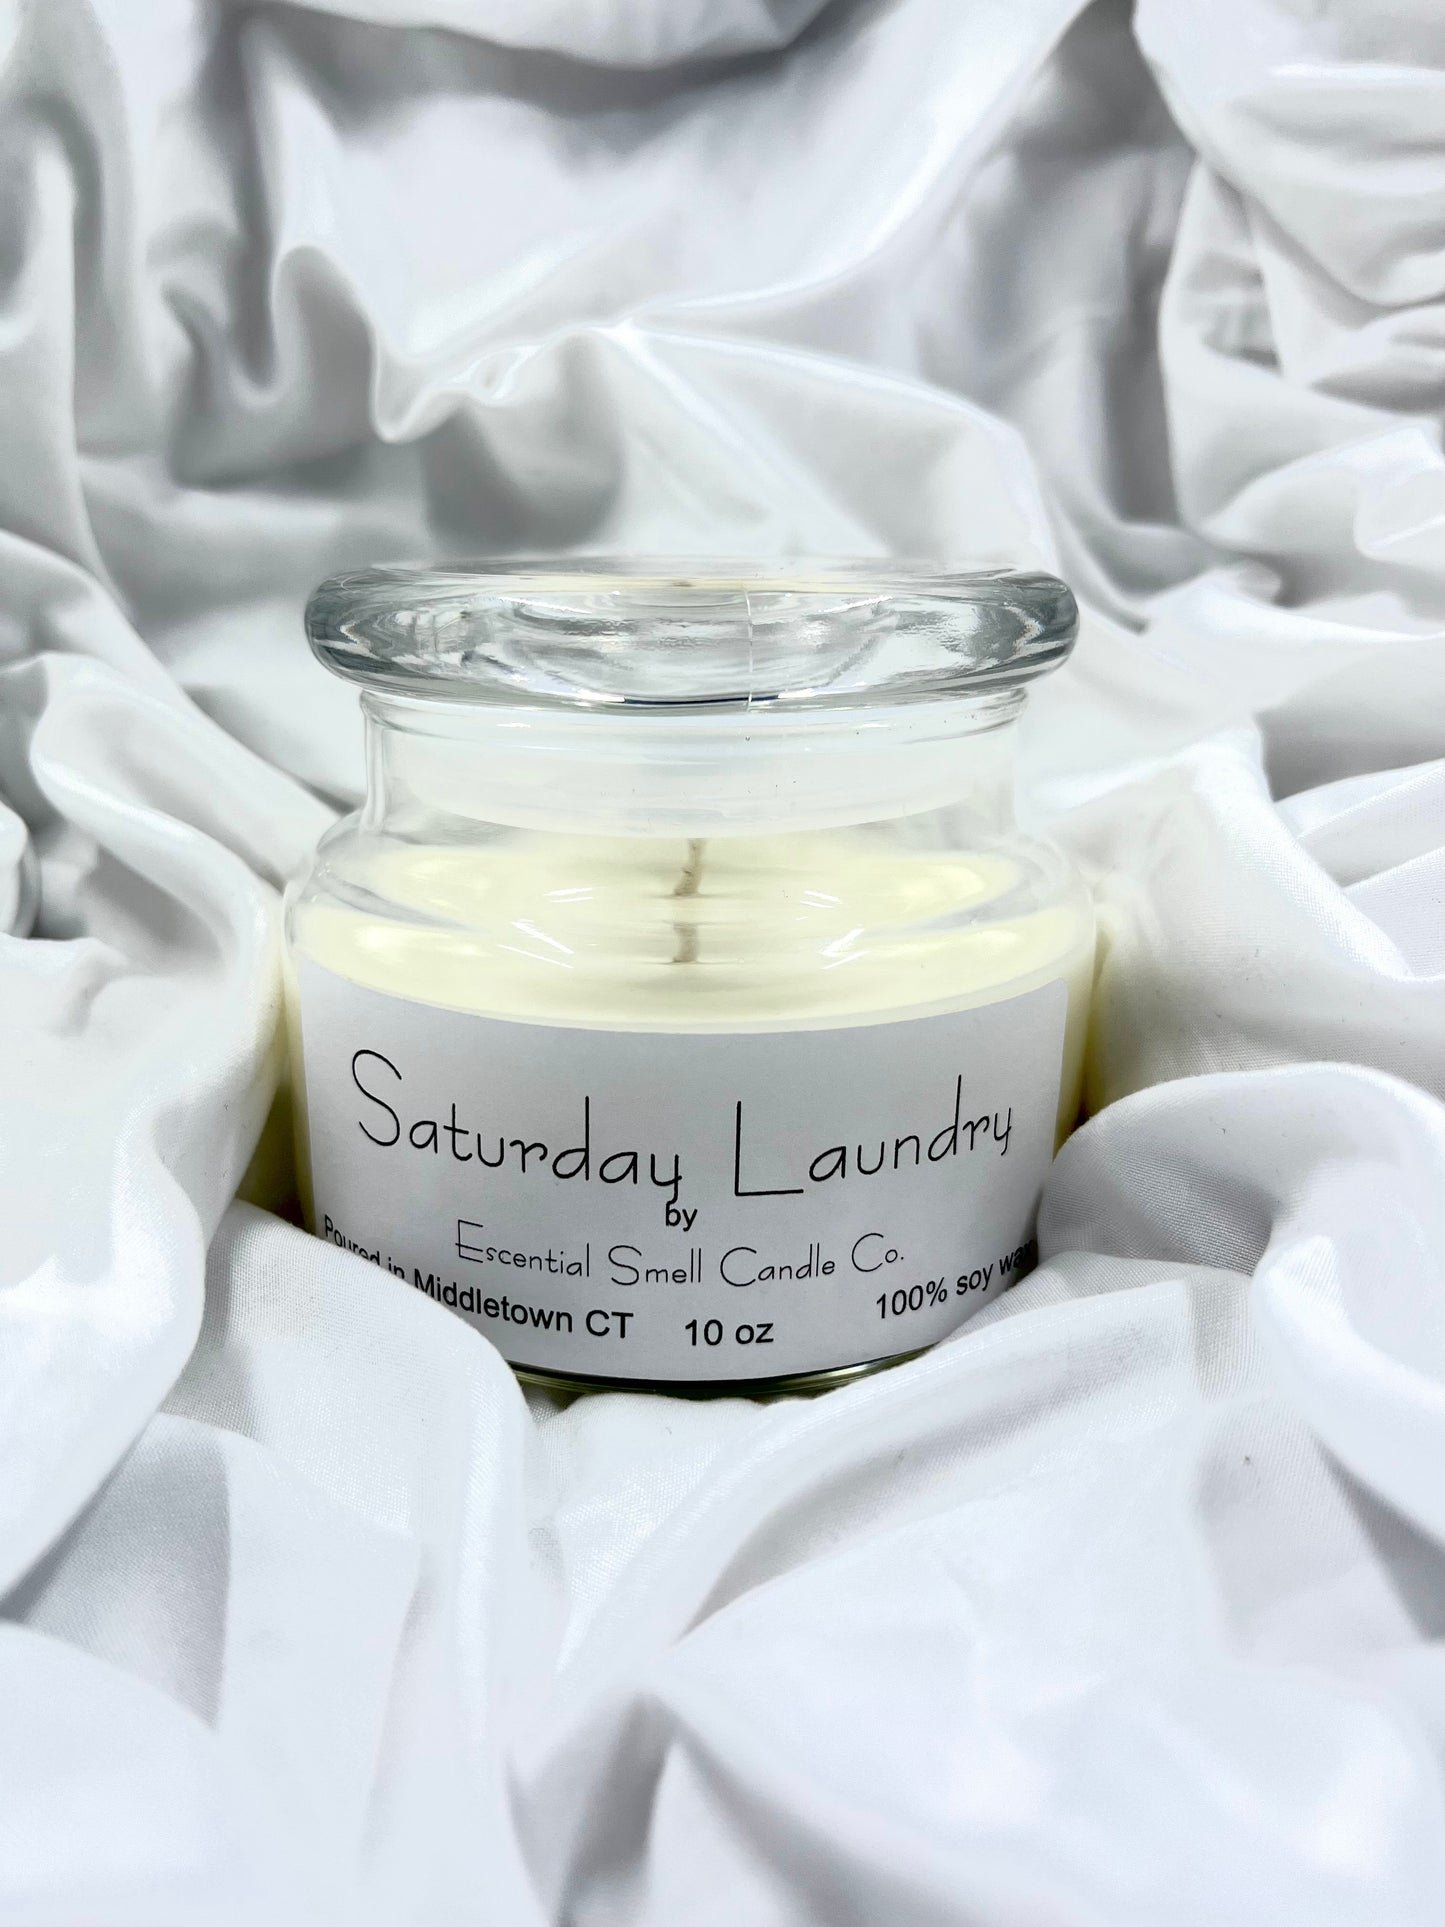 Imagine everyday smelling like the scent of fresh laundry. Saturday Laundry is the perfect everyday clean cotton scent and is perfect to burn to add the finishing touches to your clean home.